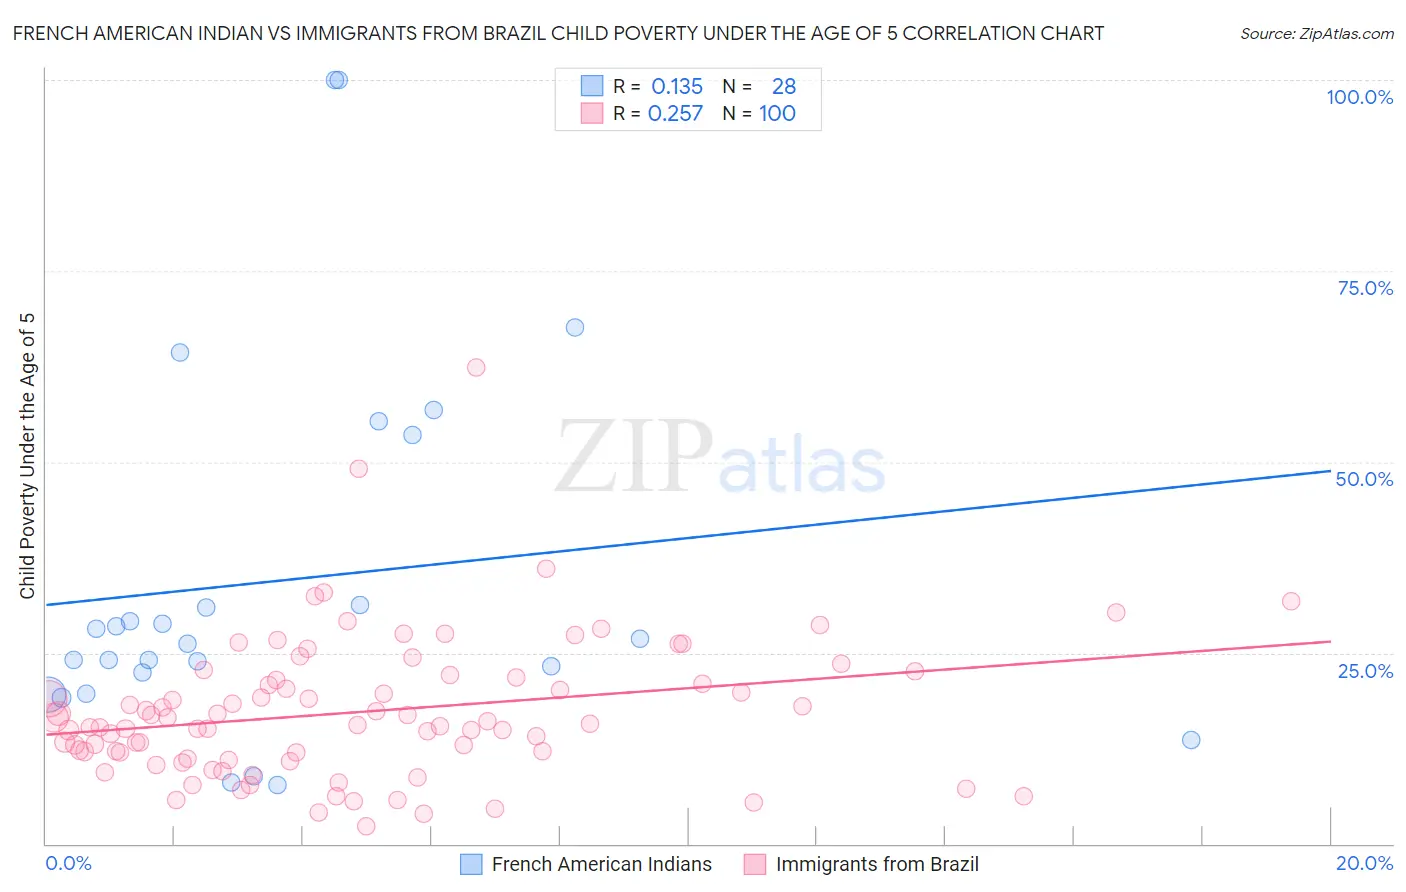 French American Indian vs Immigrants from Brazil Child Poverty Under the Age of 5